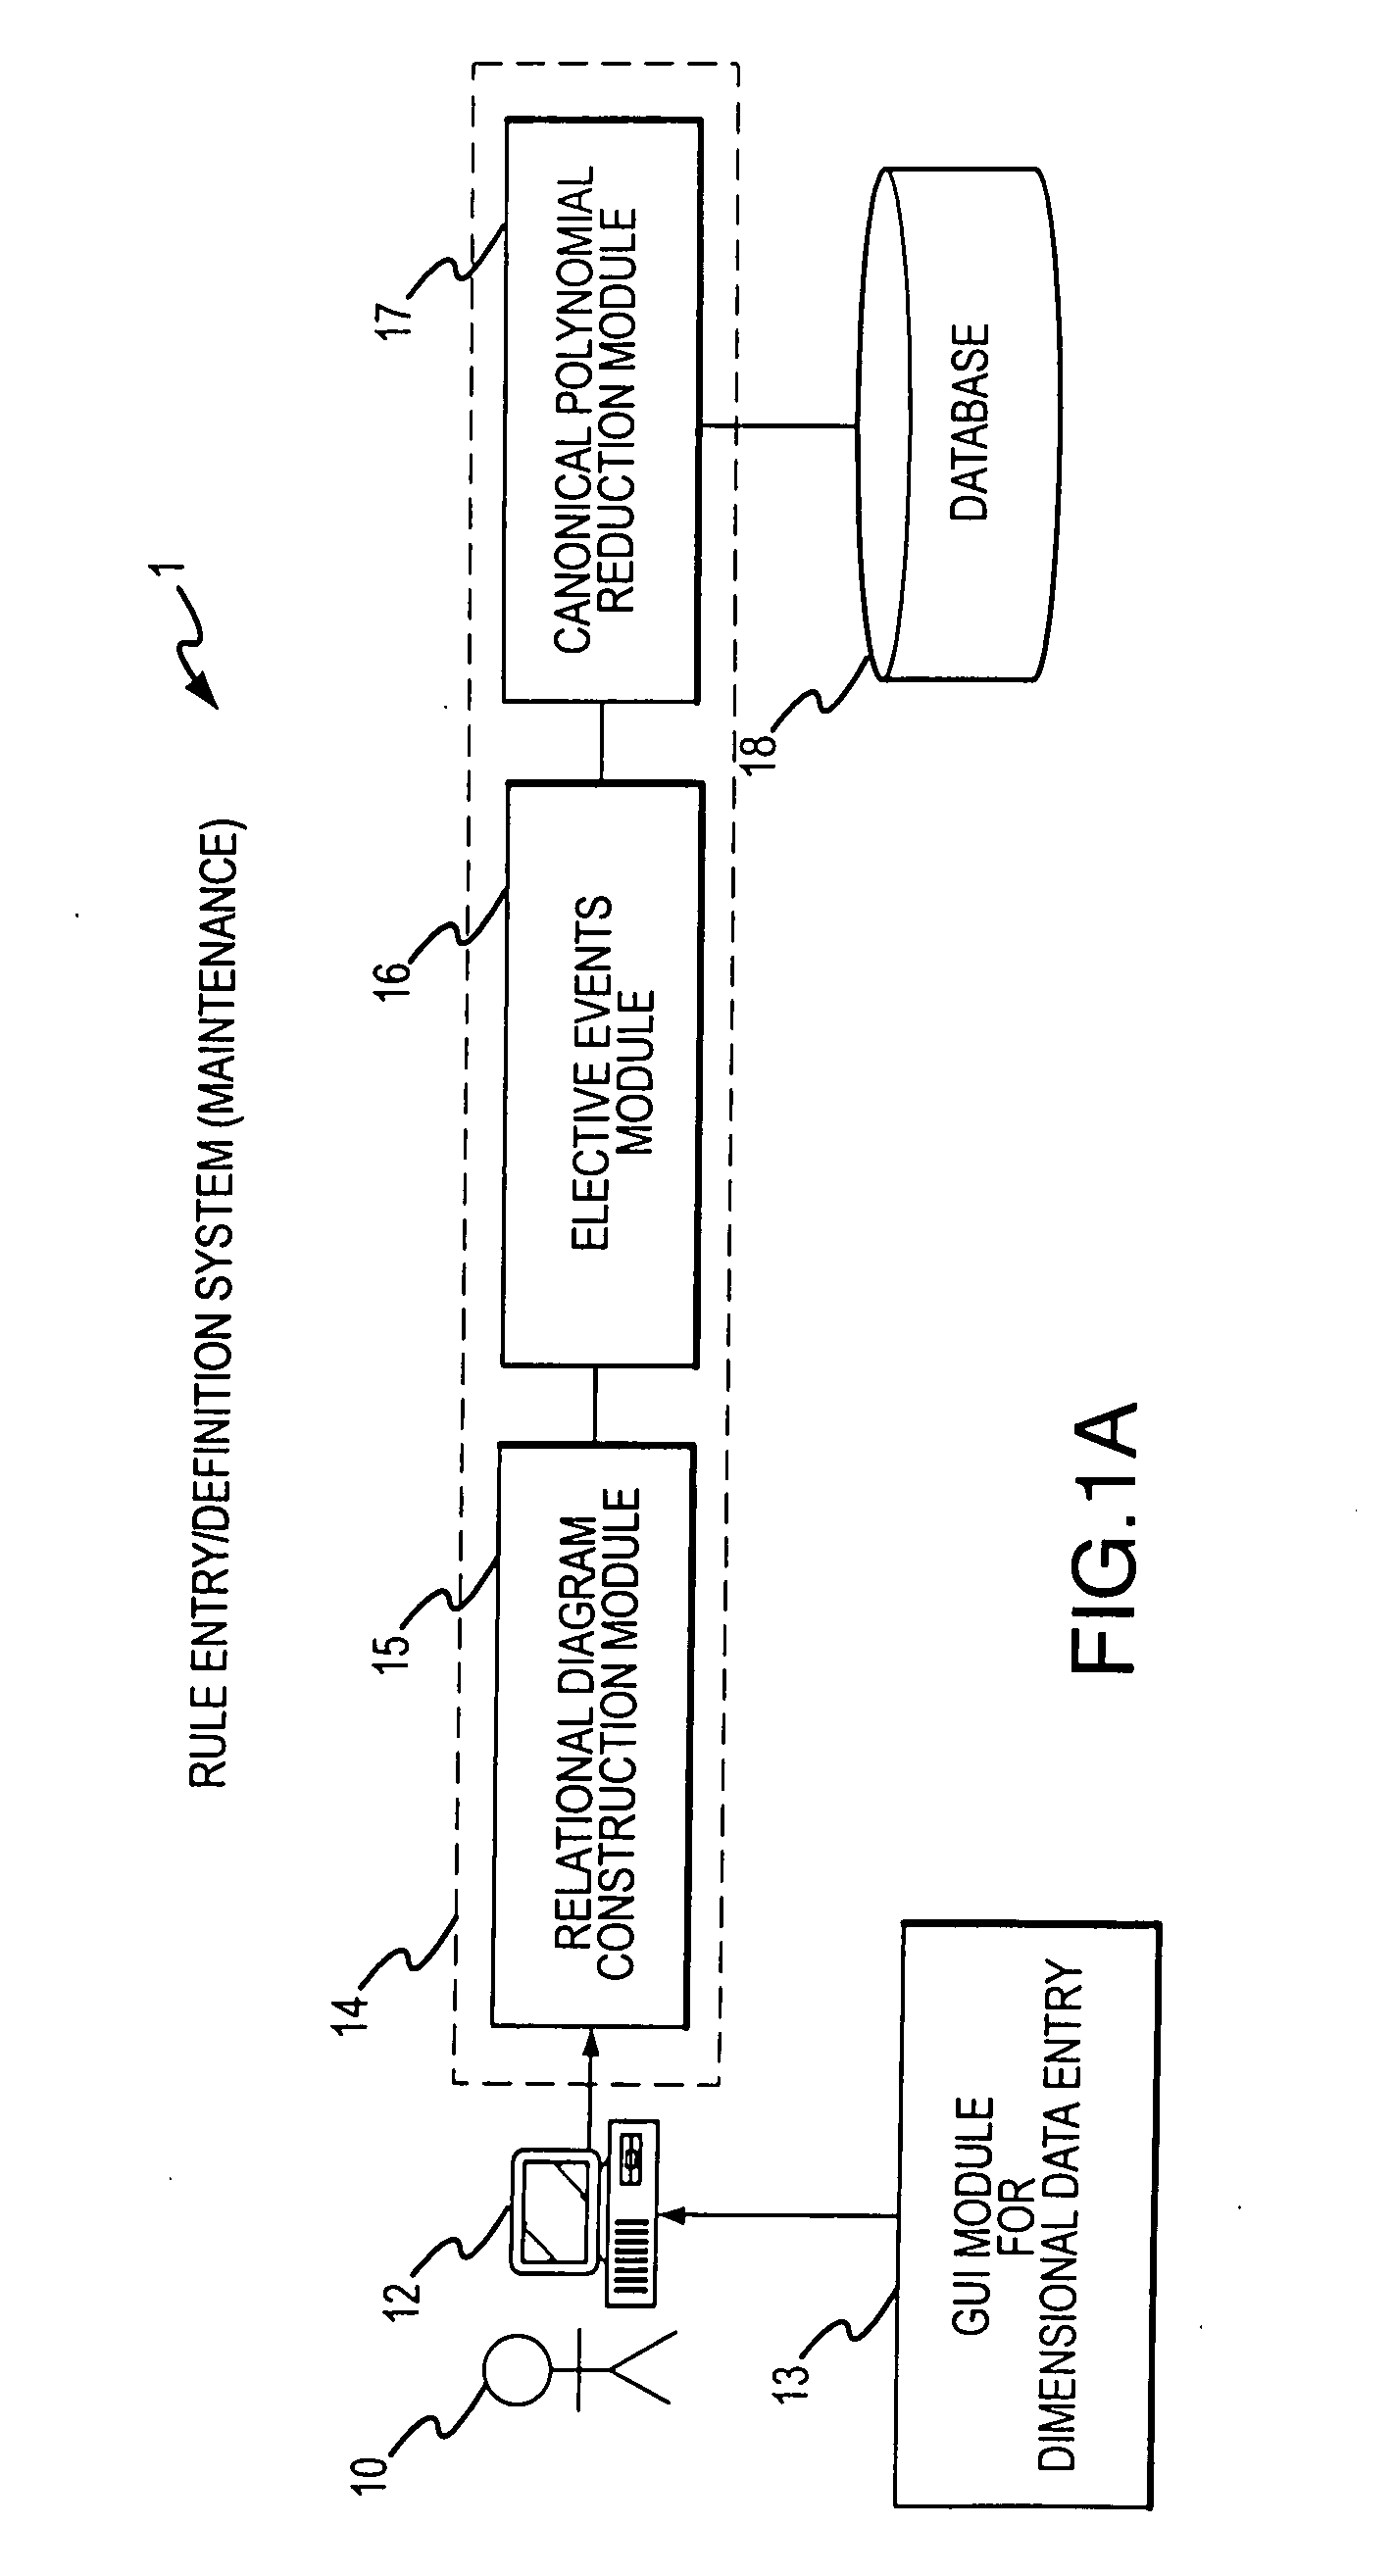 Rule processing system